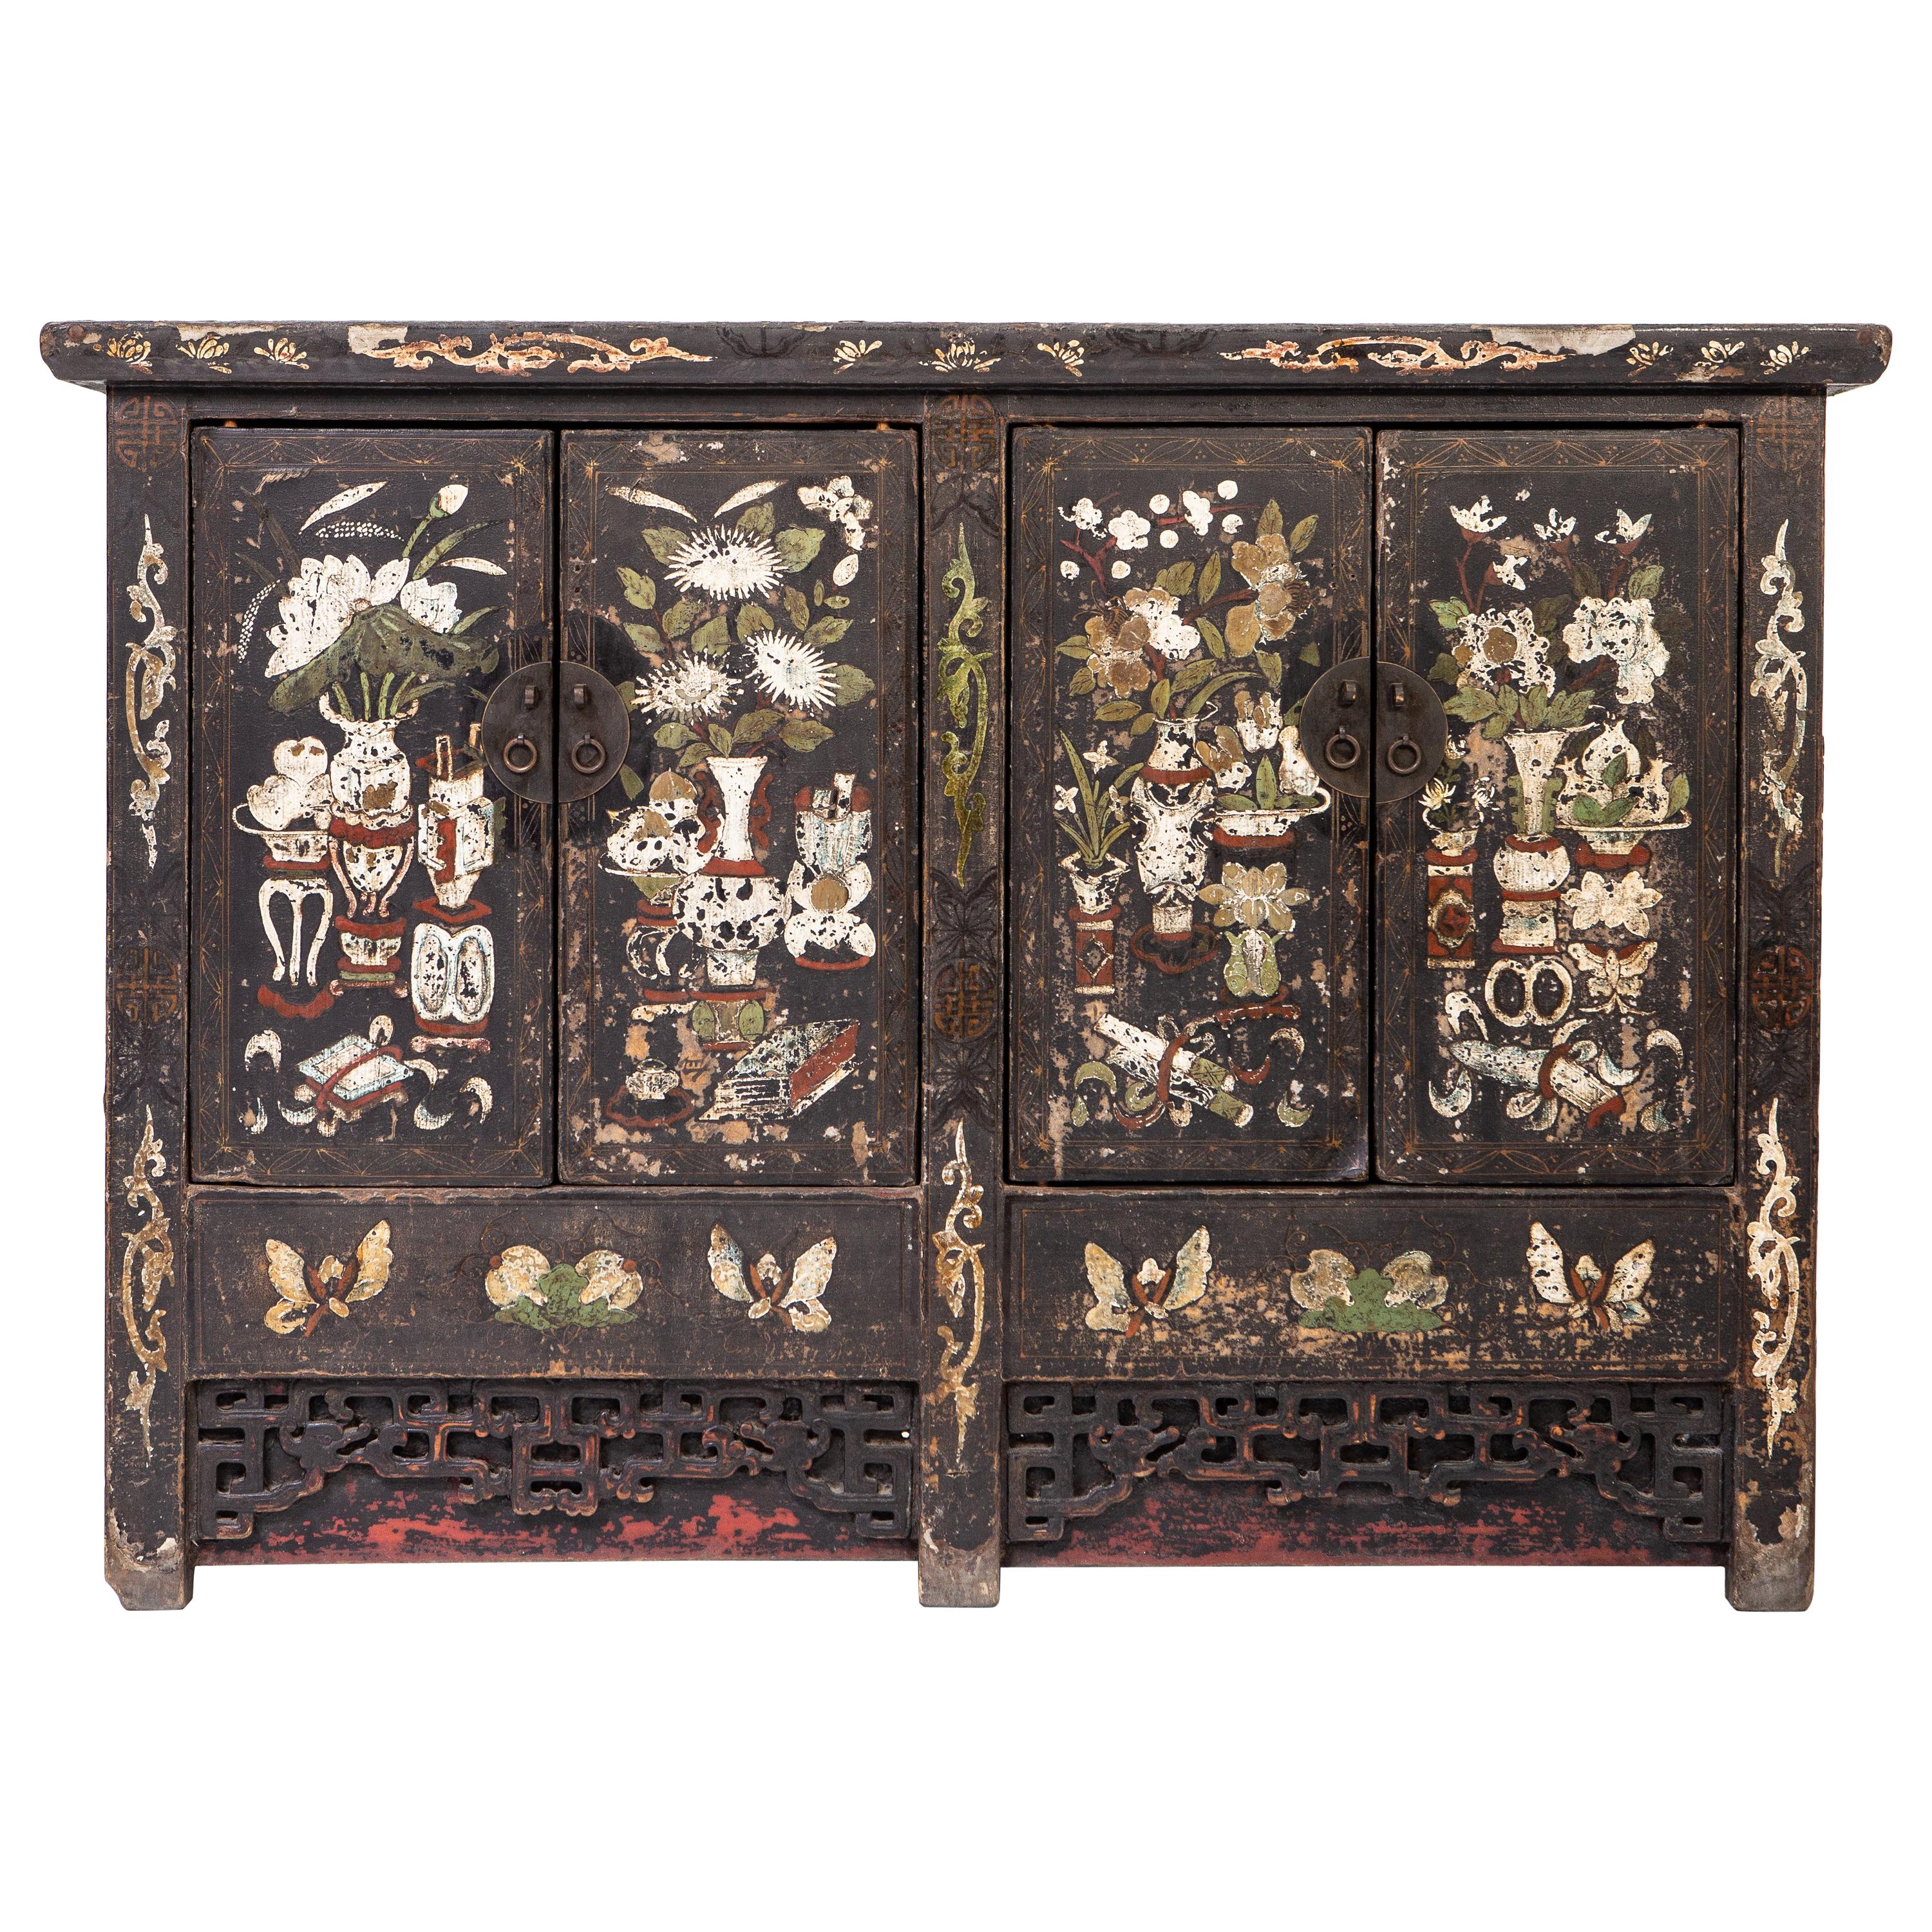 Early Qing Dynasty Painted Cabinet with Two Pairs of Doors